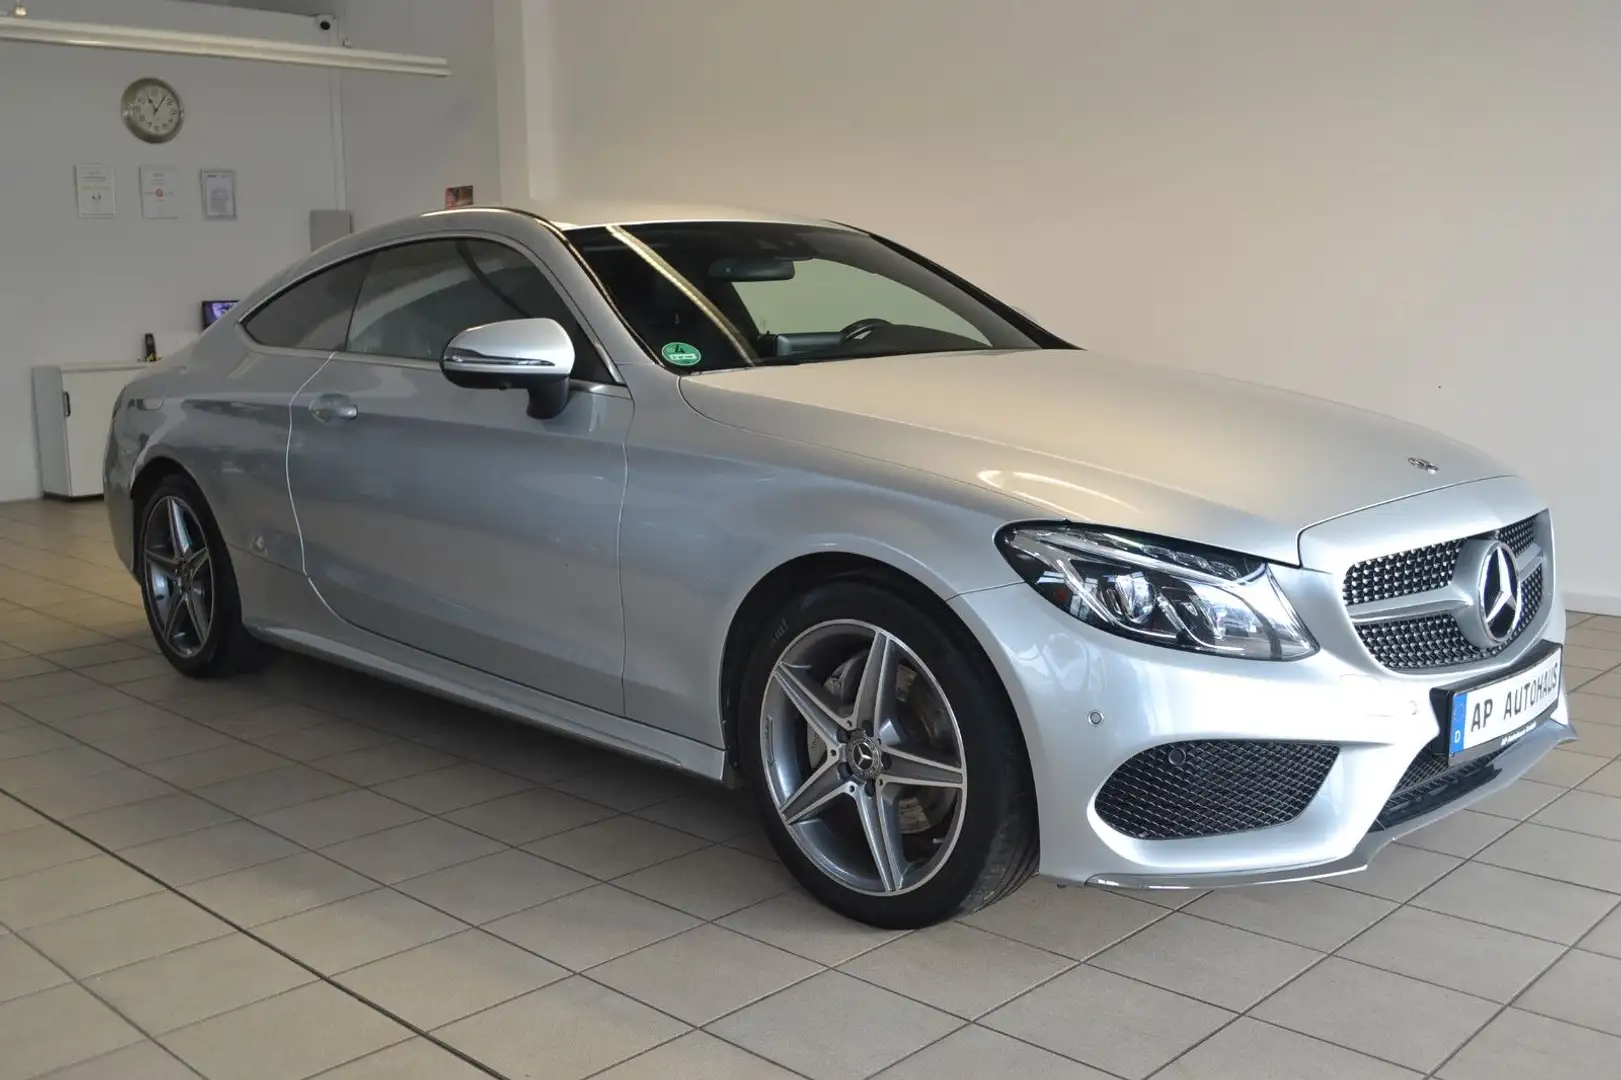 Used Mercedes Benz C-Class 180